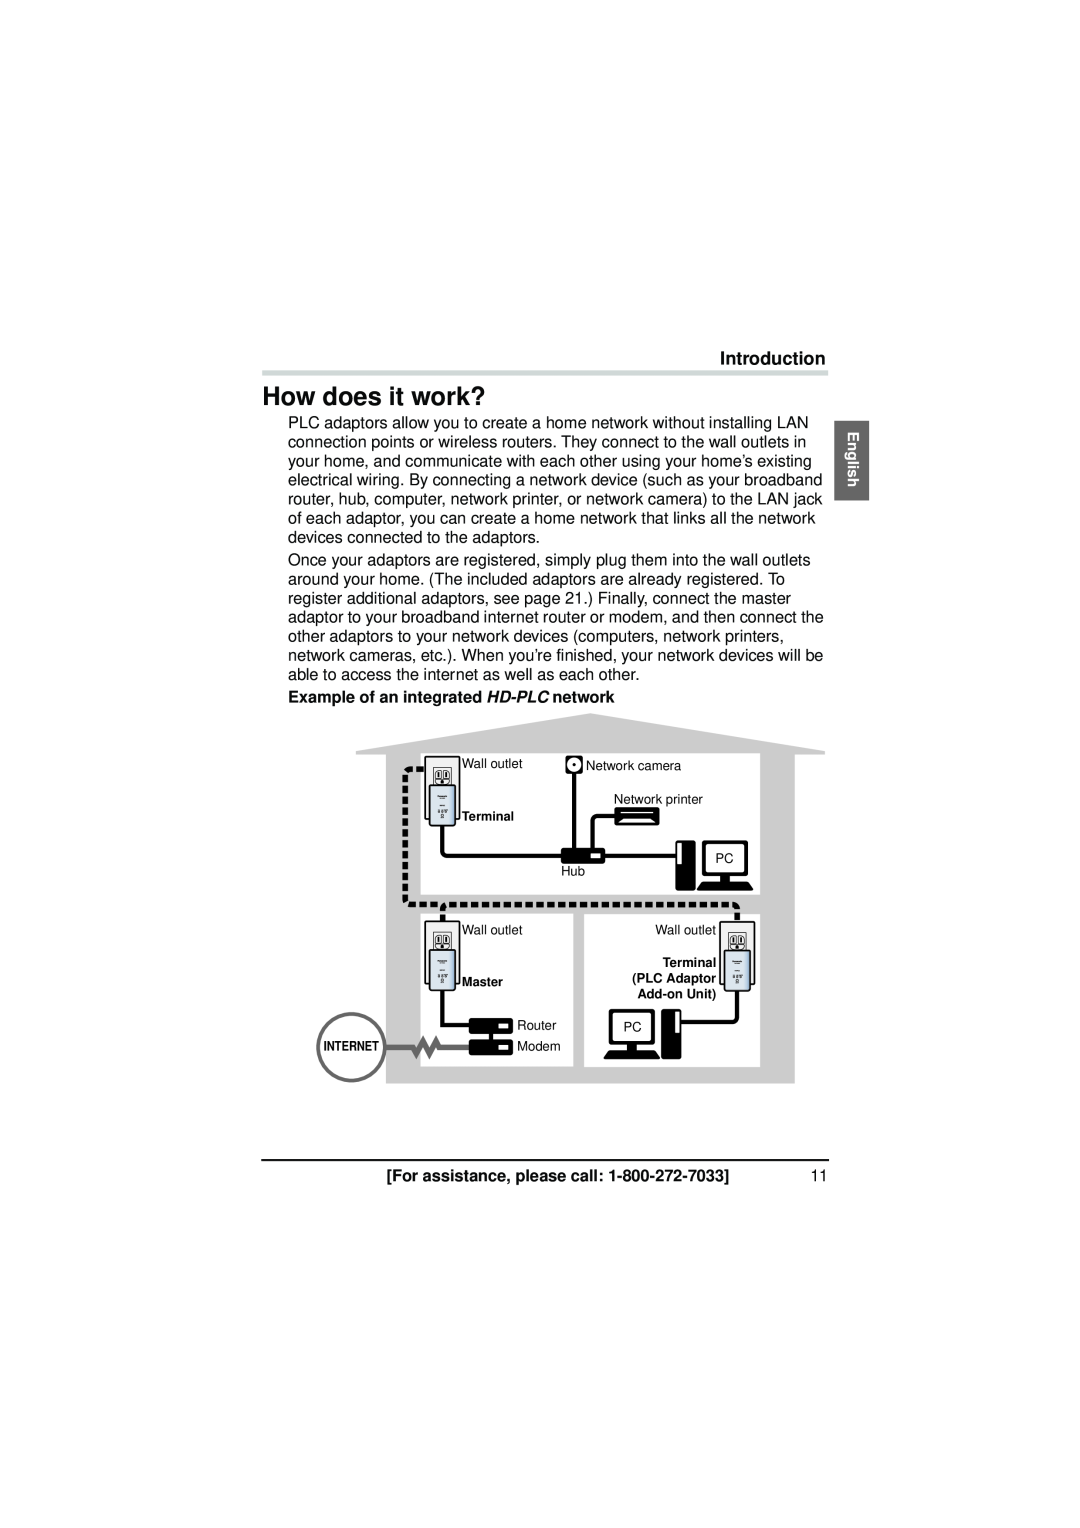 Panasonic BL-PA300KTA warranty How does it work?, Example of an integrated HD-PLC network, Introduction, INTERNETModem 